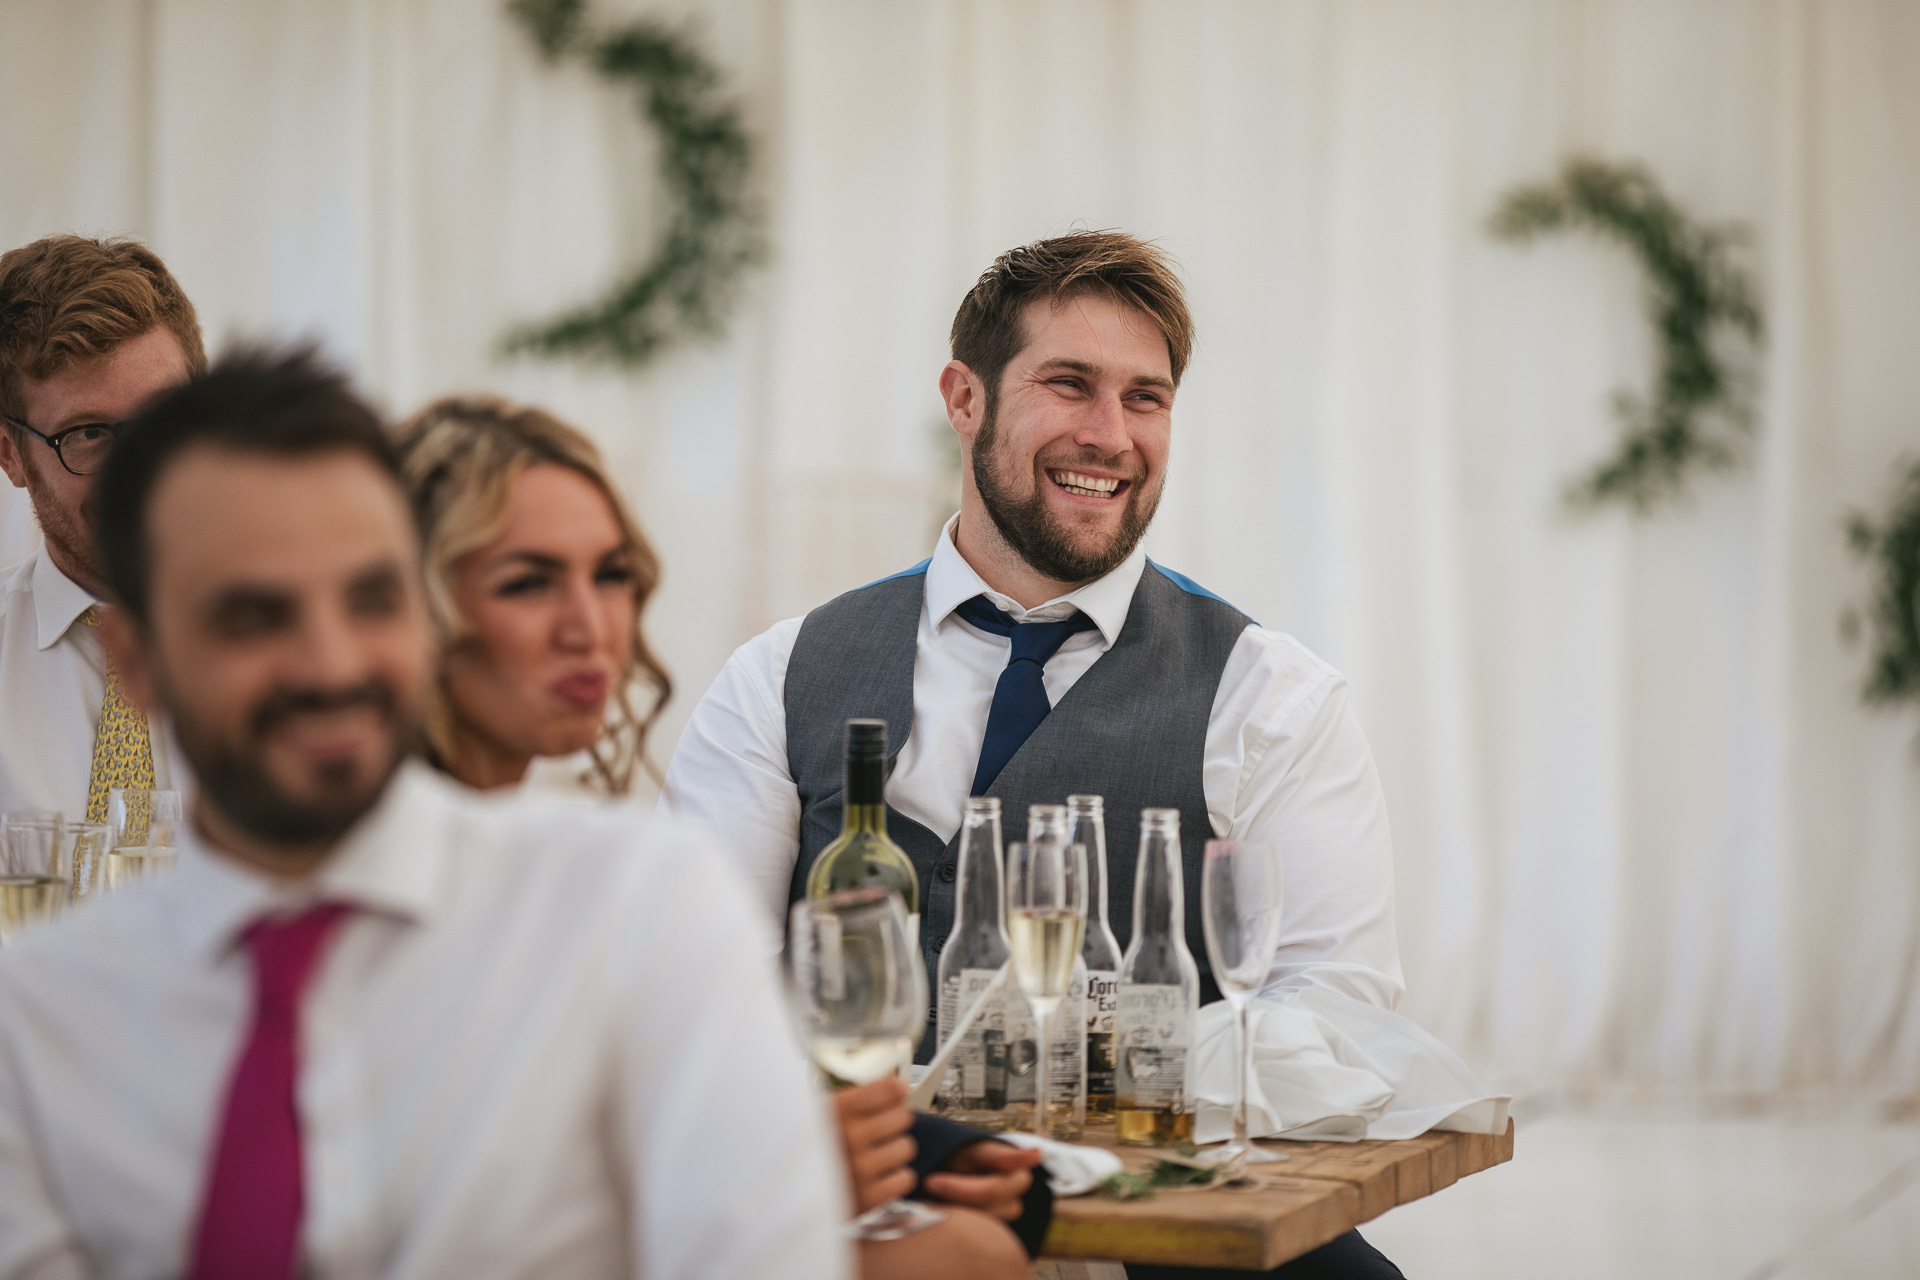 Guests laughing at wedding speeches inside a marquee